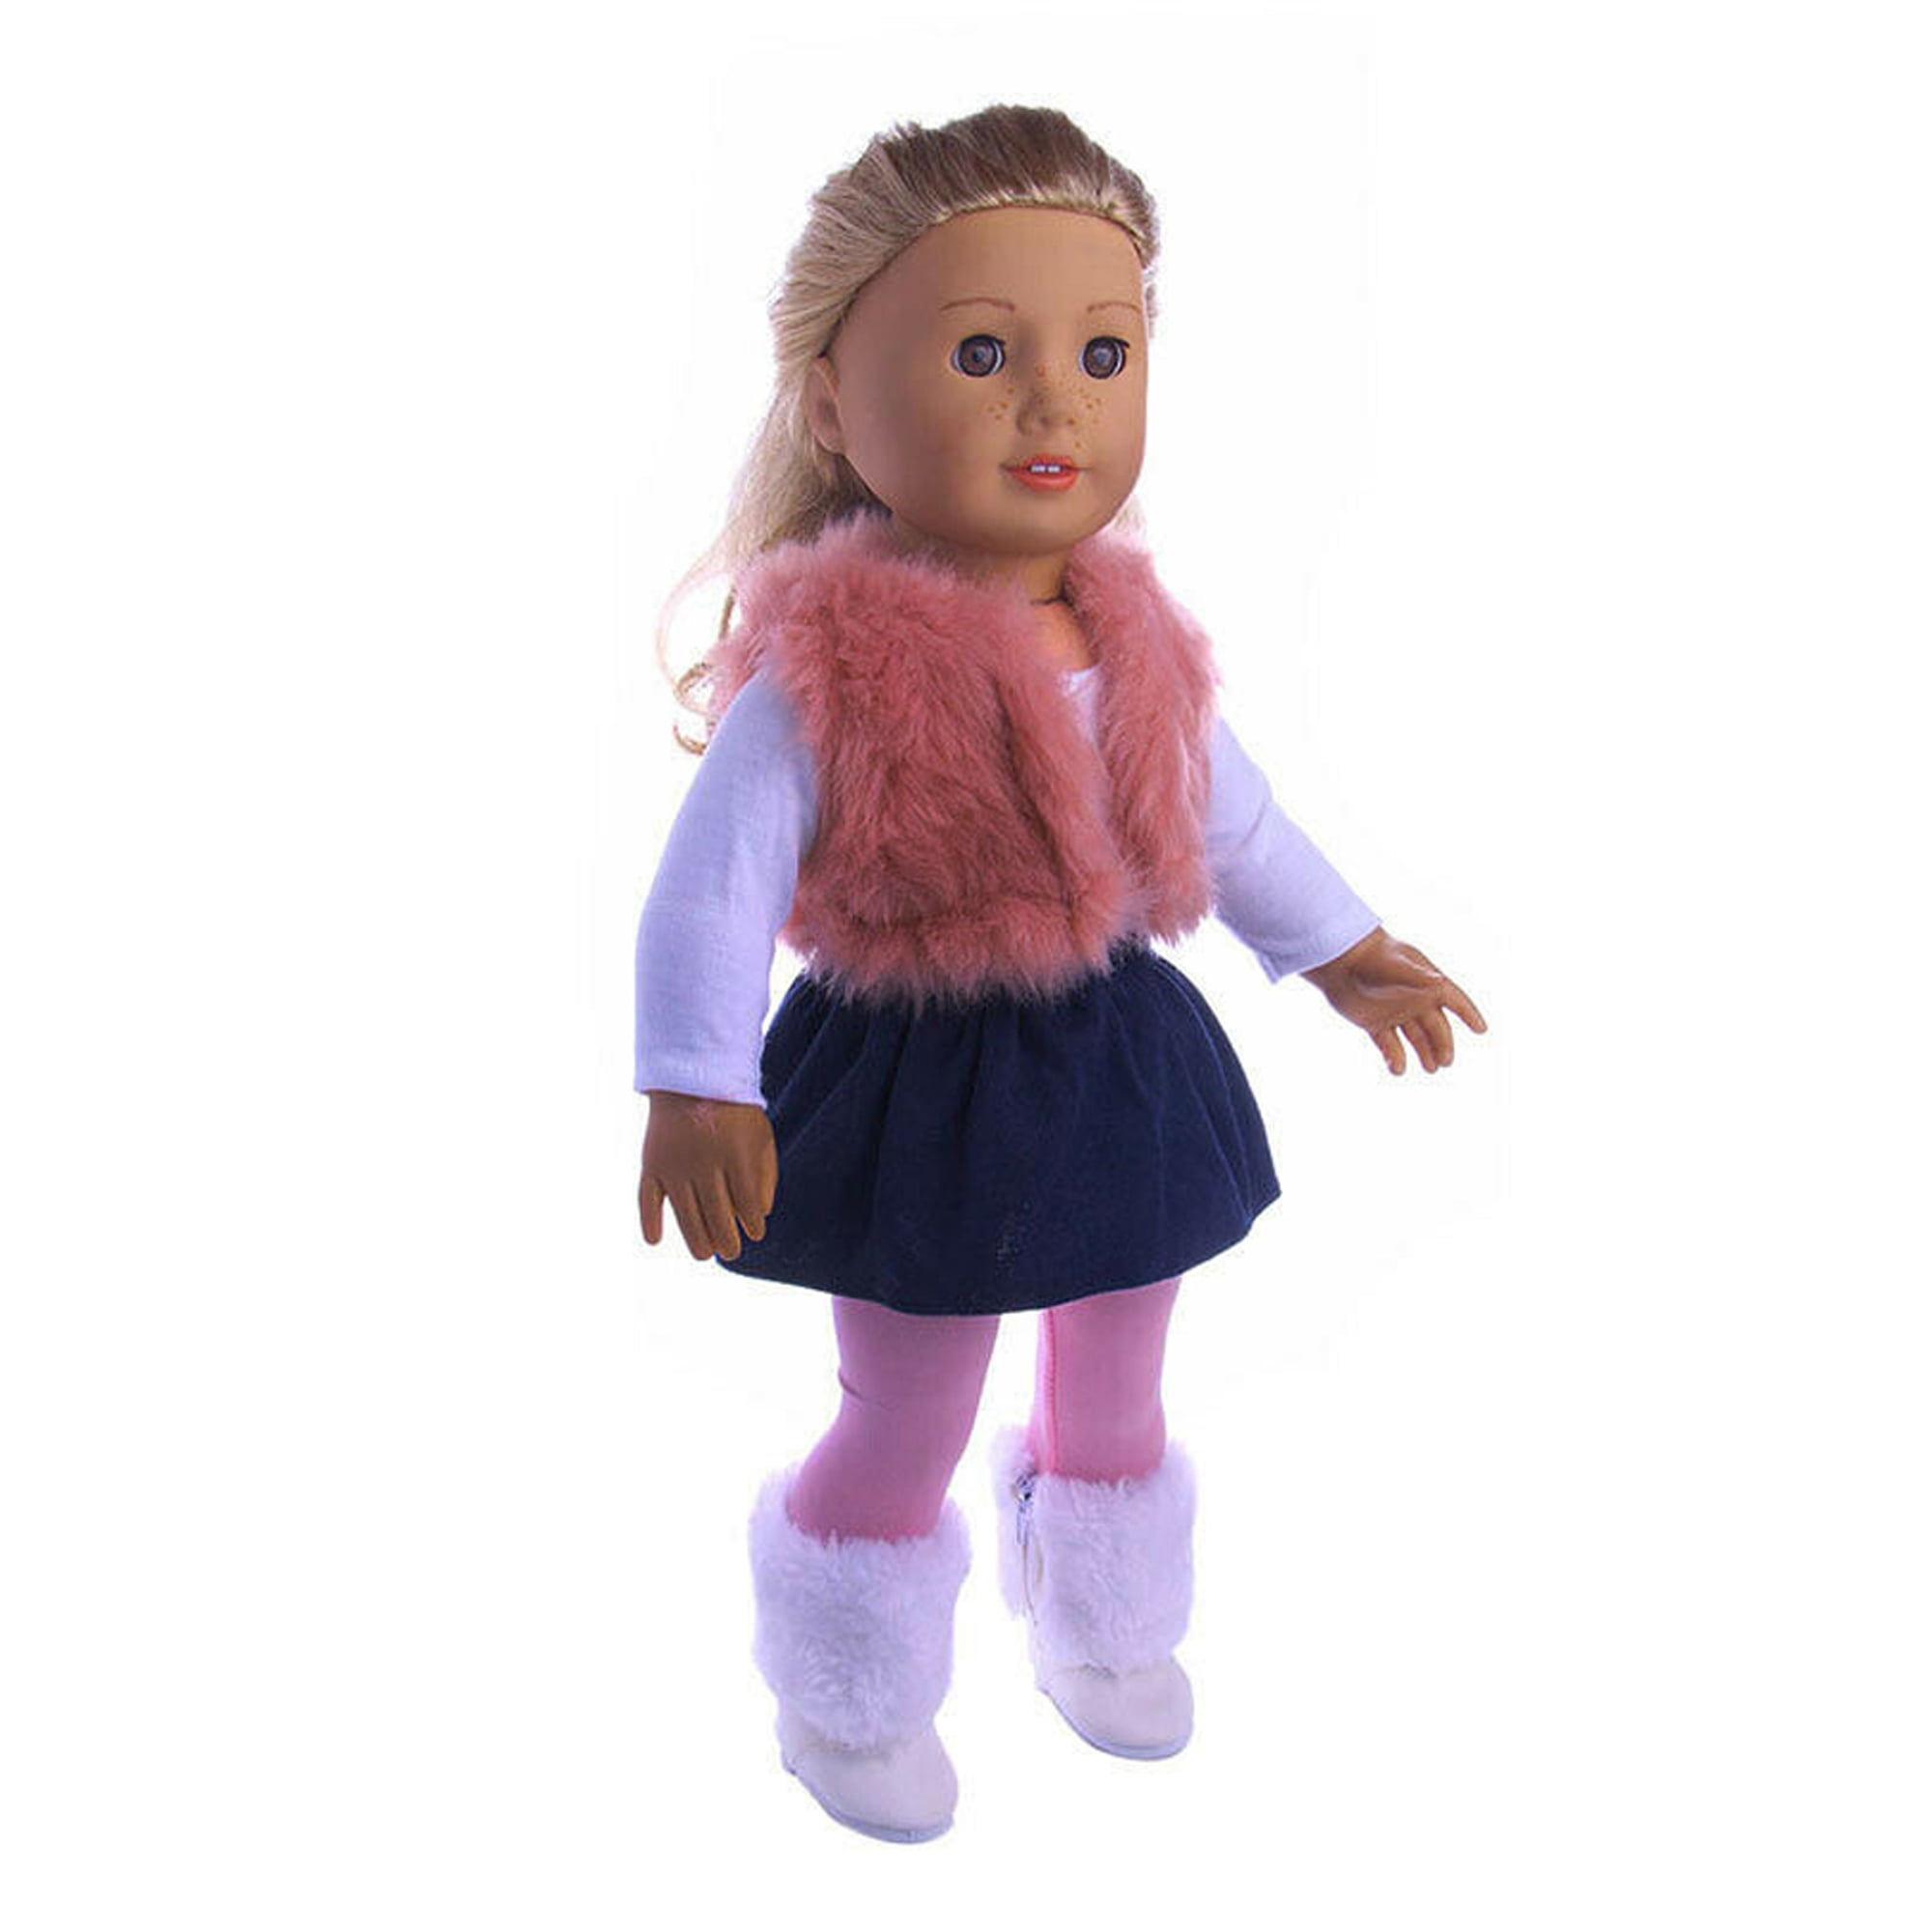 Our Generation and Design a friend Doll Easter Jumper 